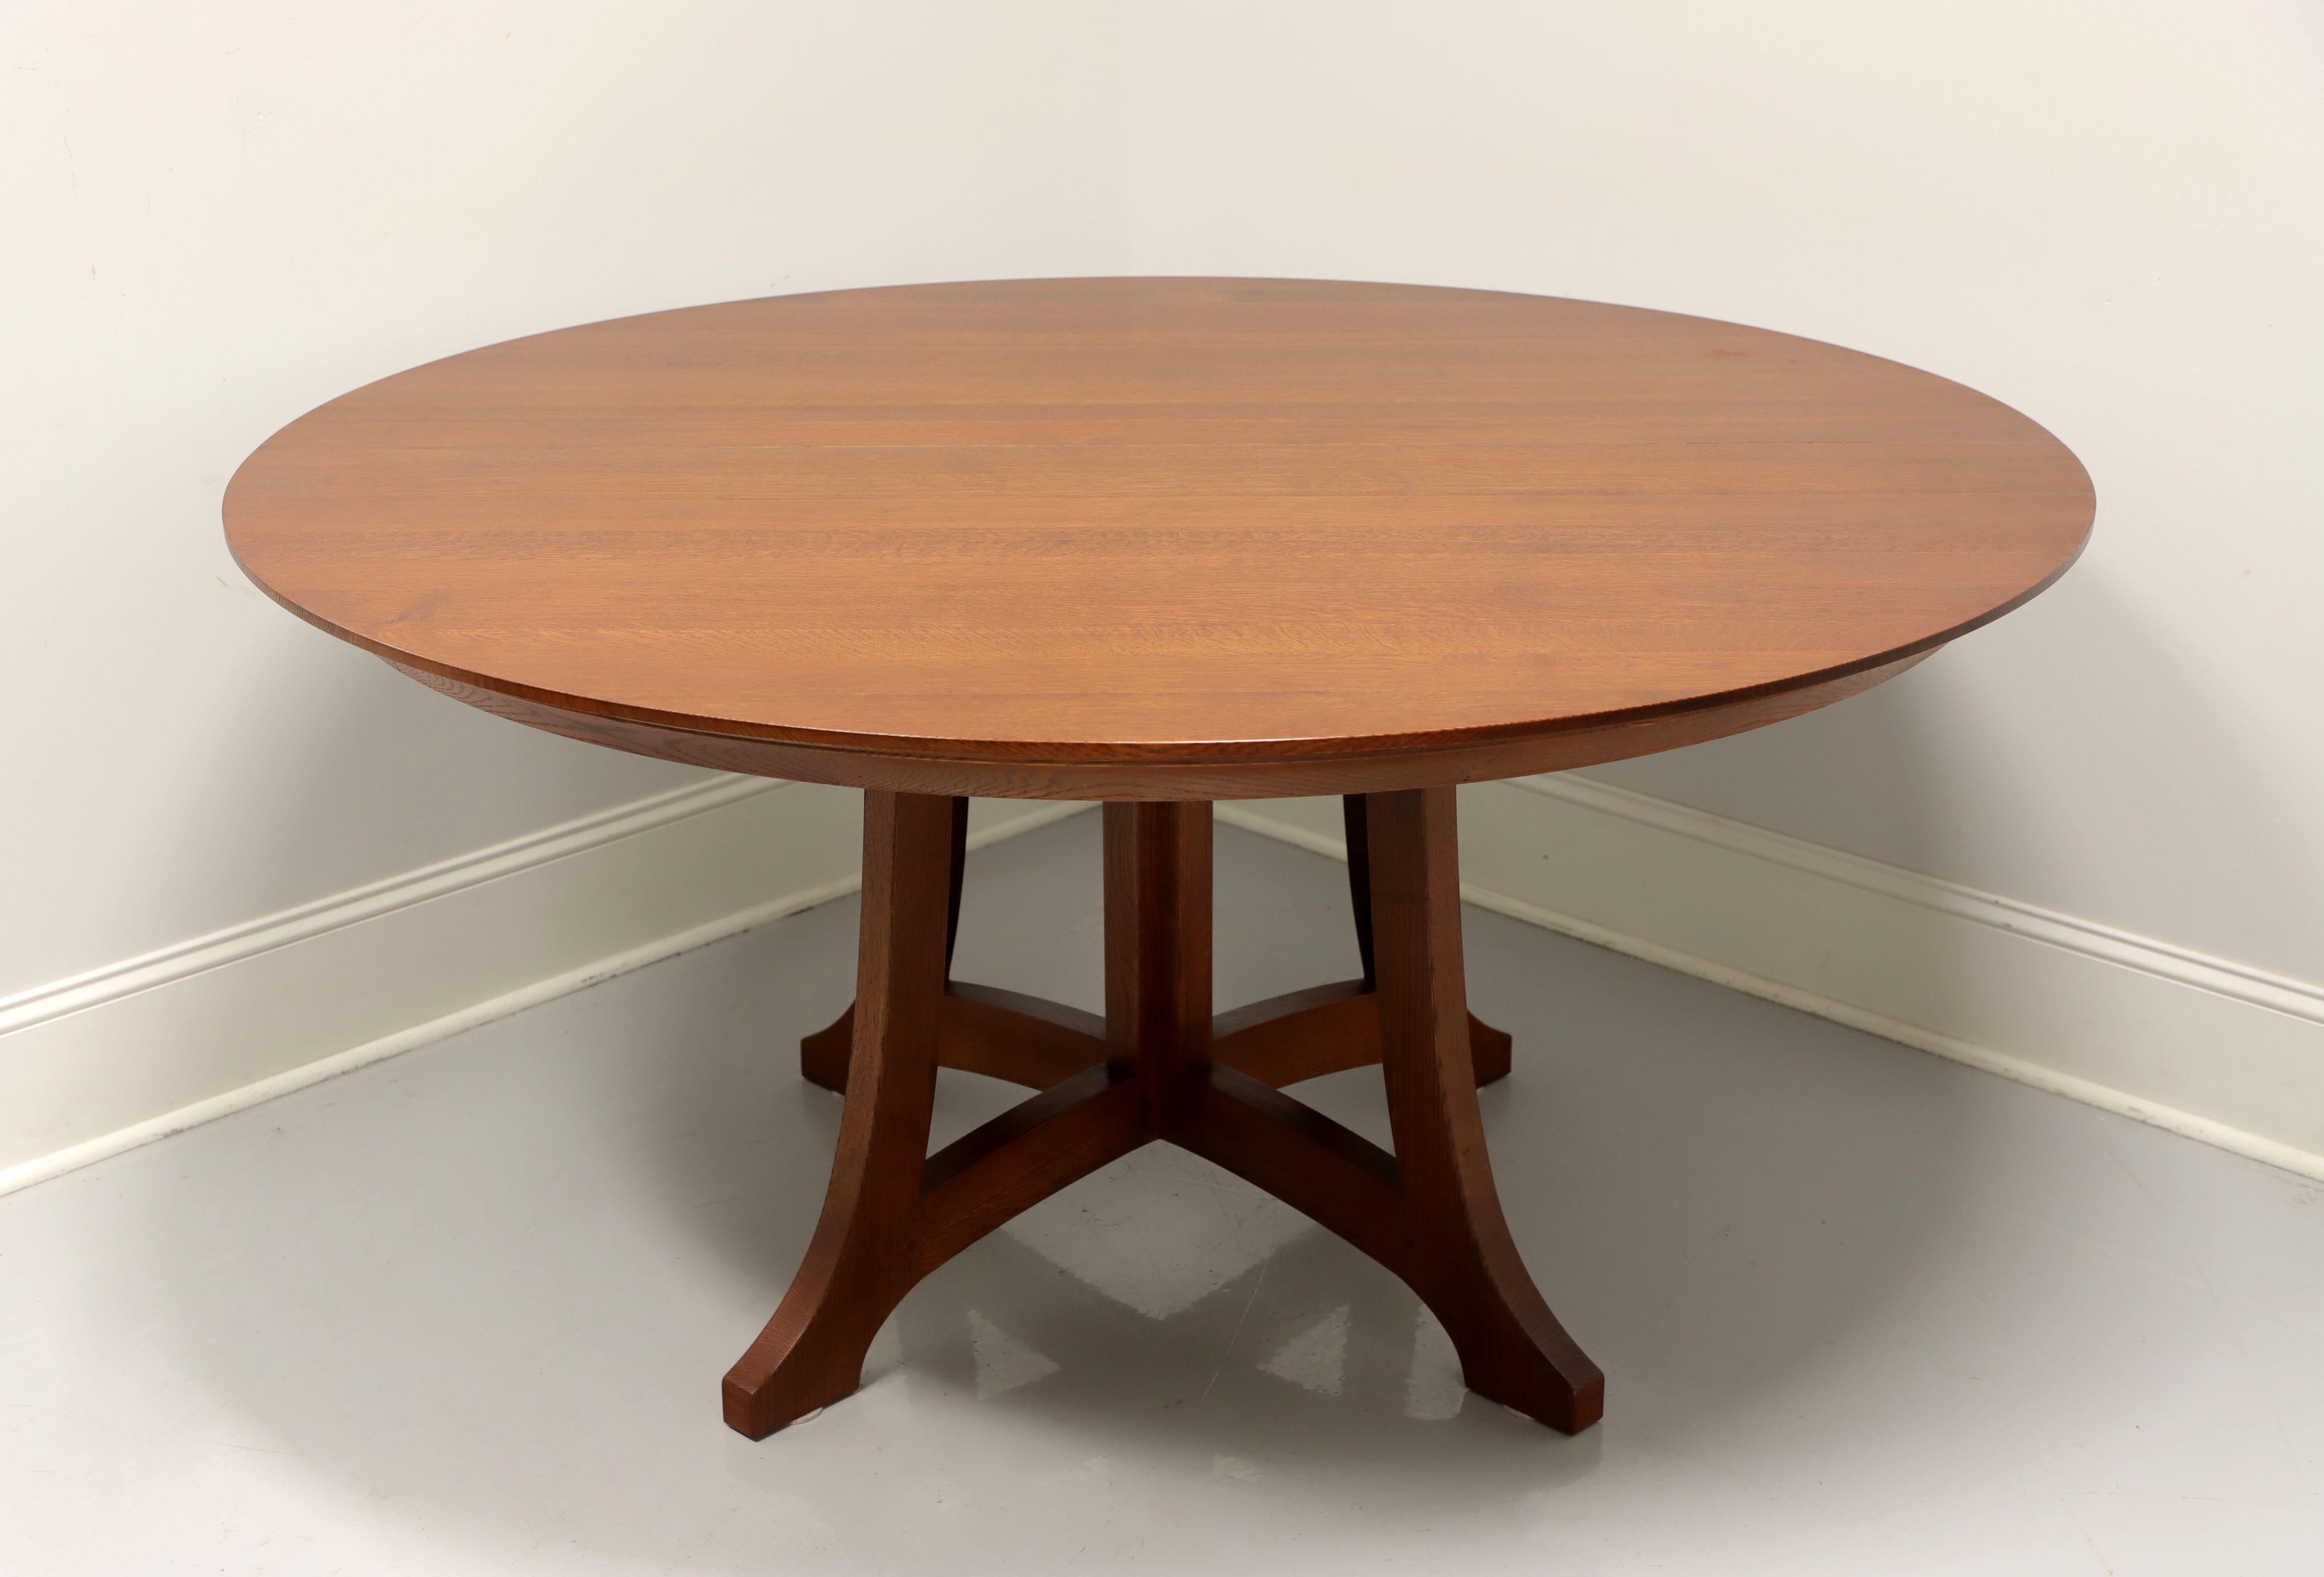 A Mission / Arts & Crafts style 62 inch round dining table by Stickley, from their Highlands Collection. Solid oak with a darker finish, a distinctive split pedestal base and metal expansion sliders. Includes two expansion leaves. Made in Manlius,